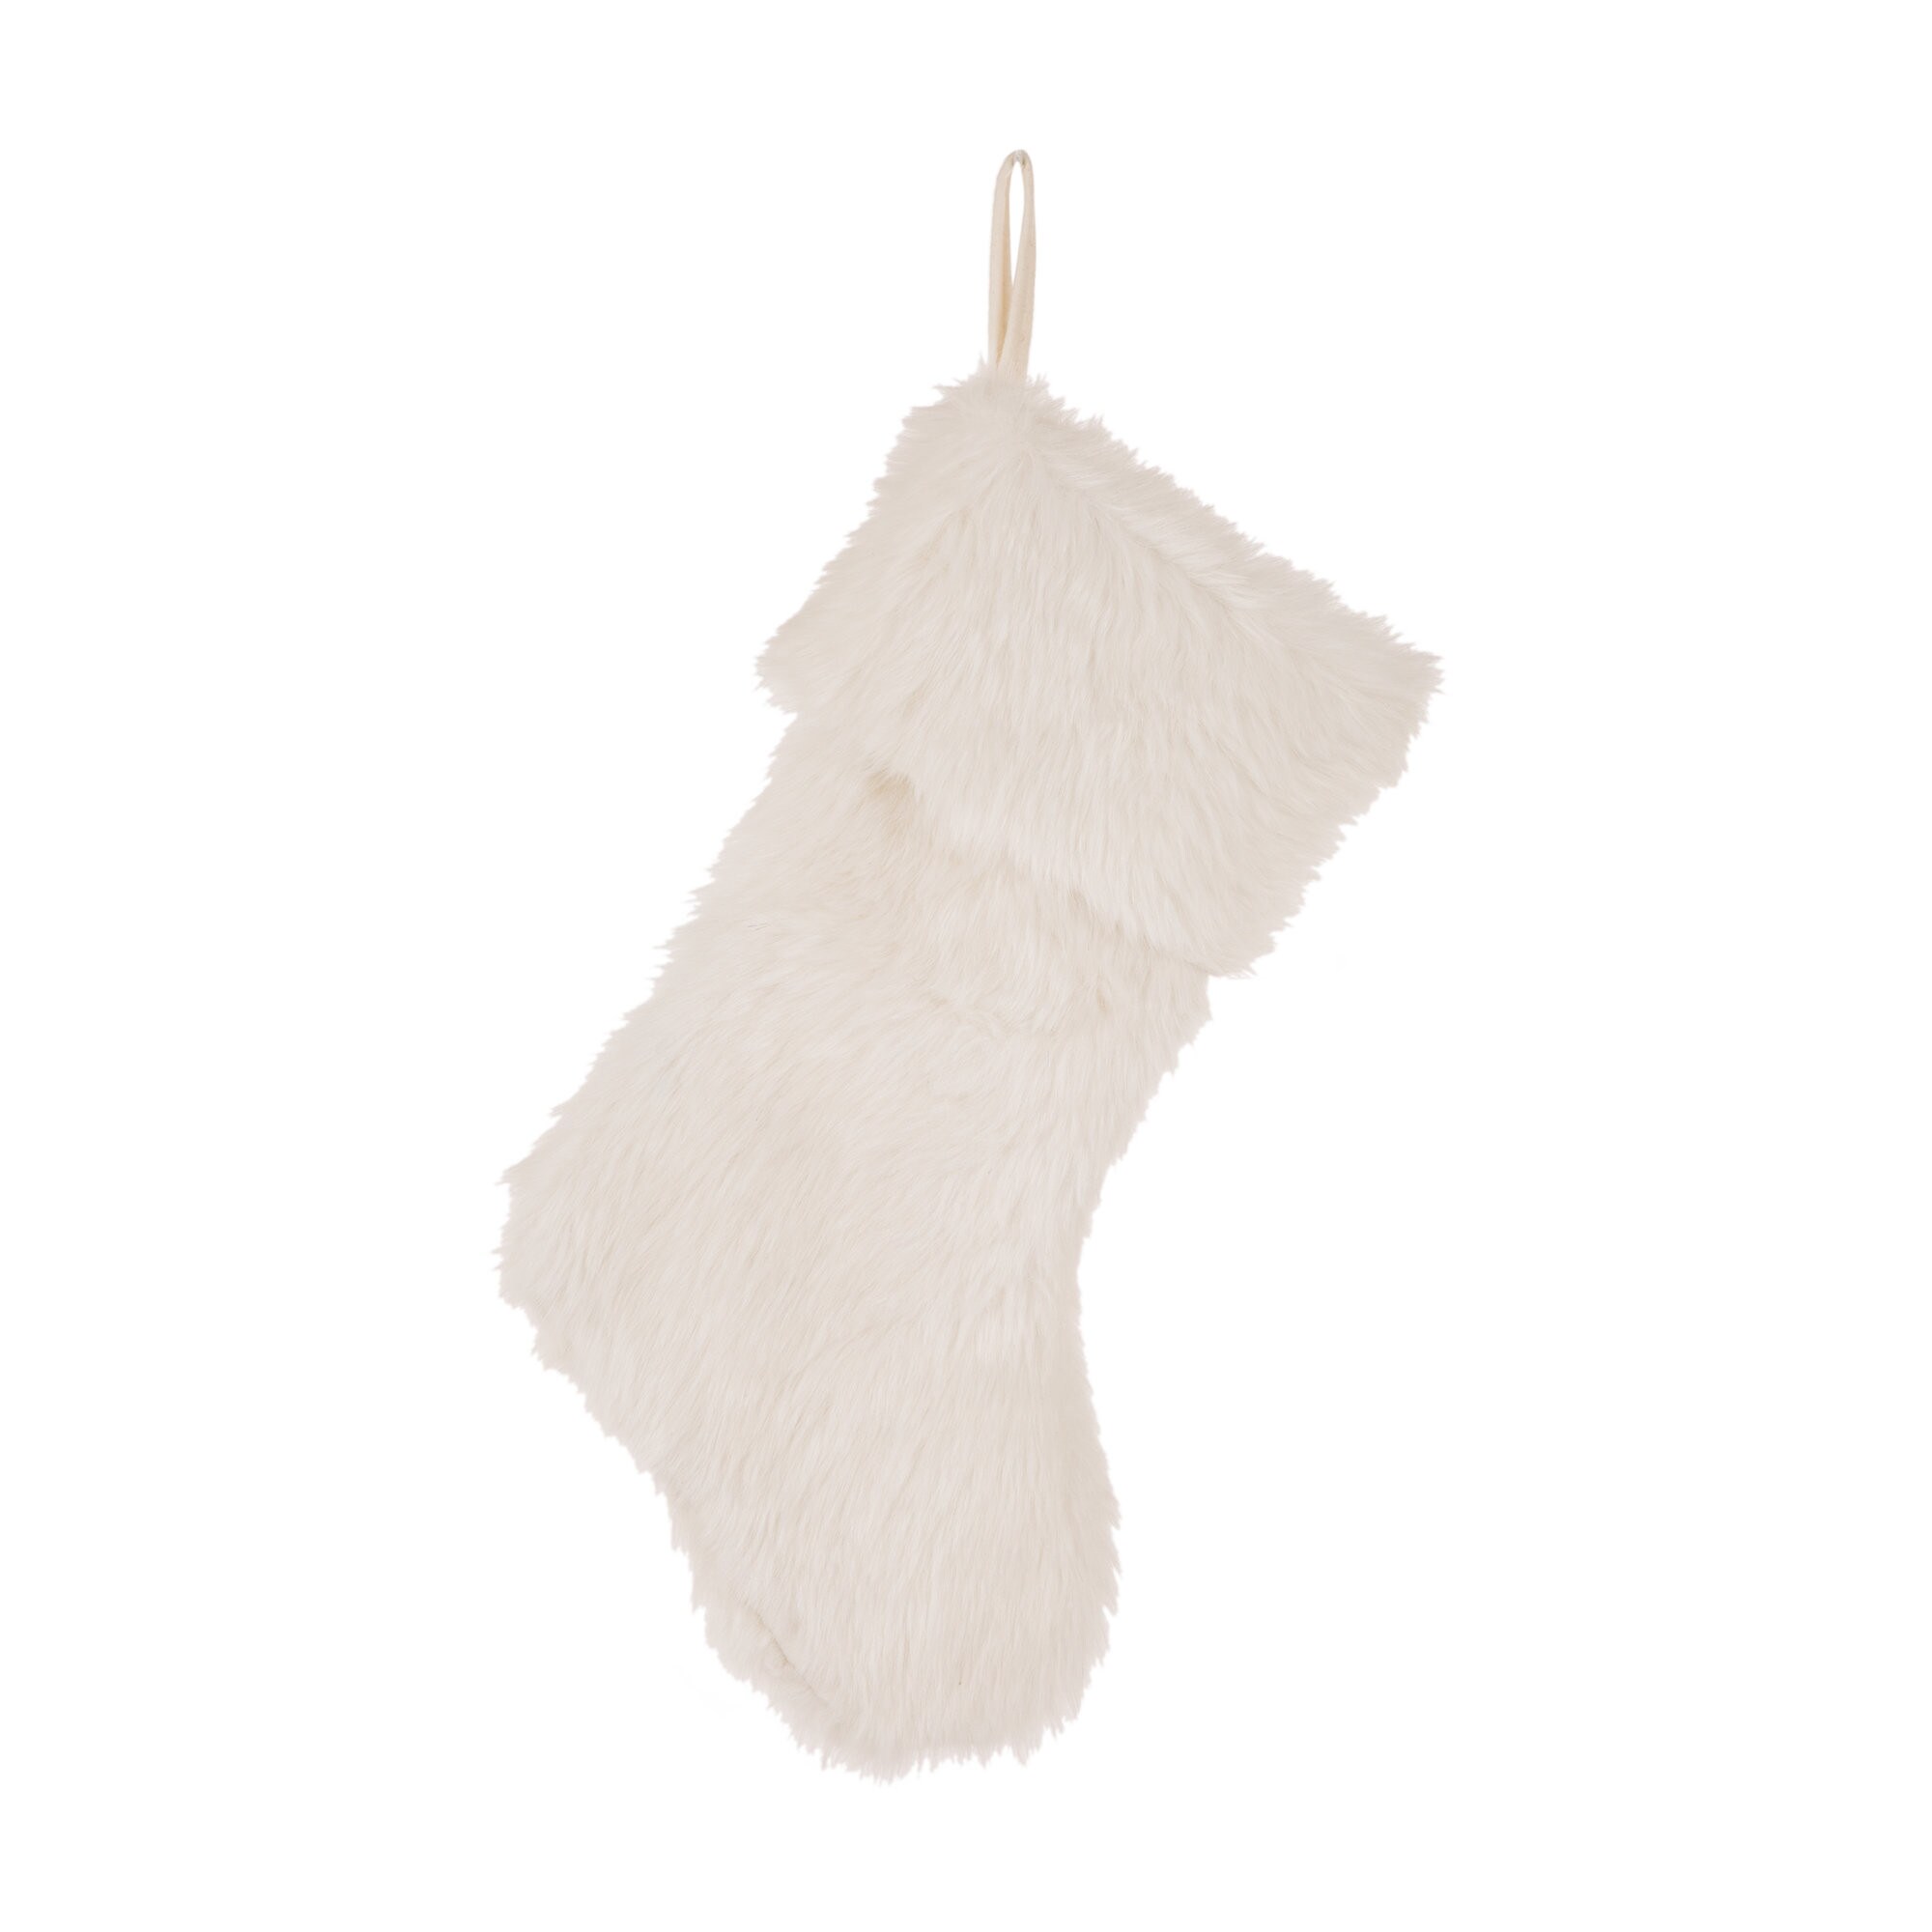 Details about   1PCS Plush Christmas Stockings White Faux Fur Large 22in Deluxe Hanging Xmas 